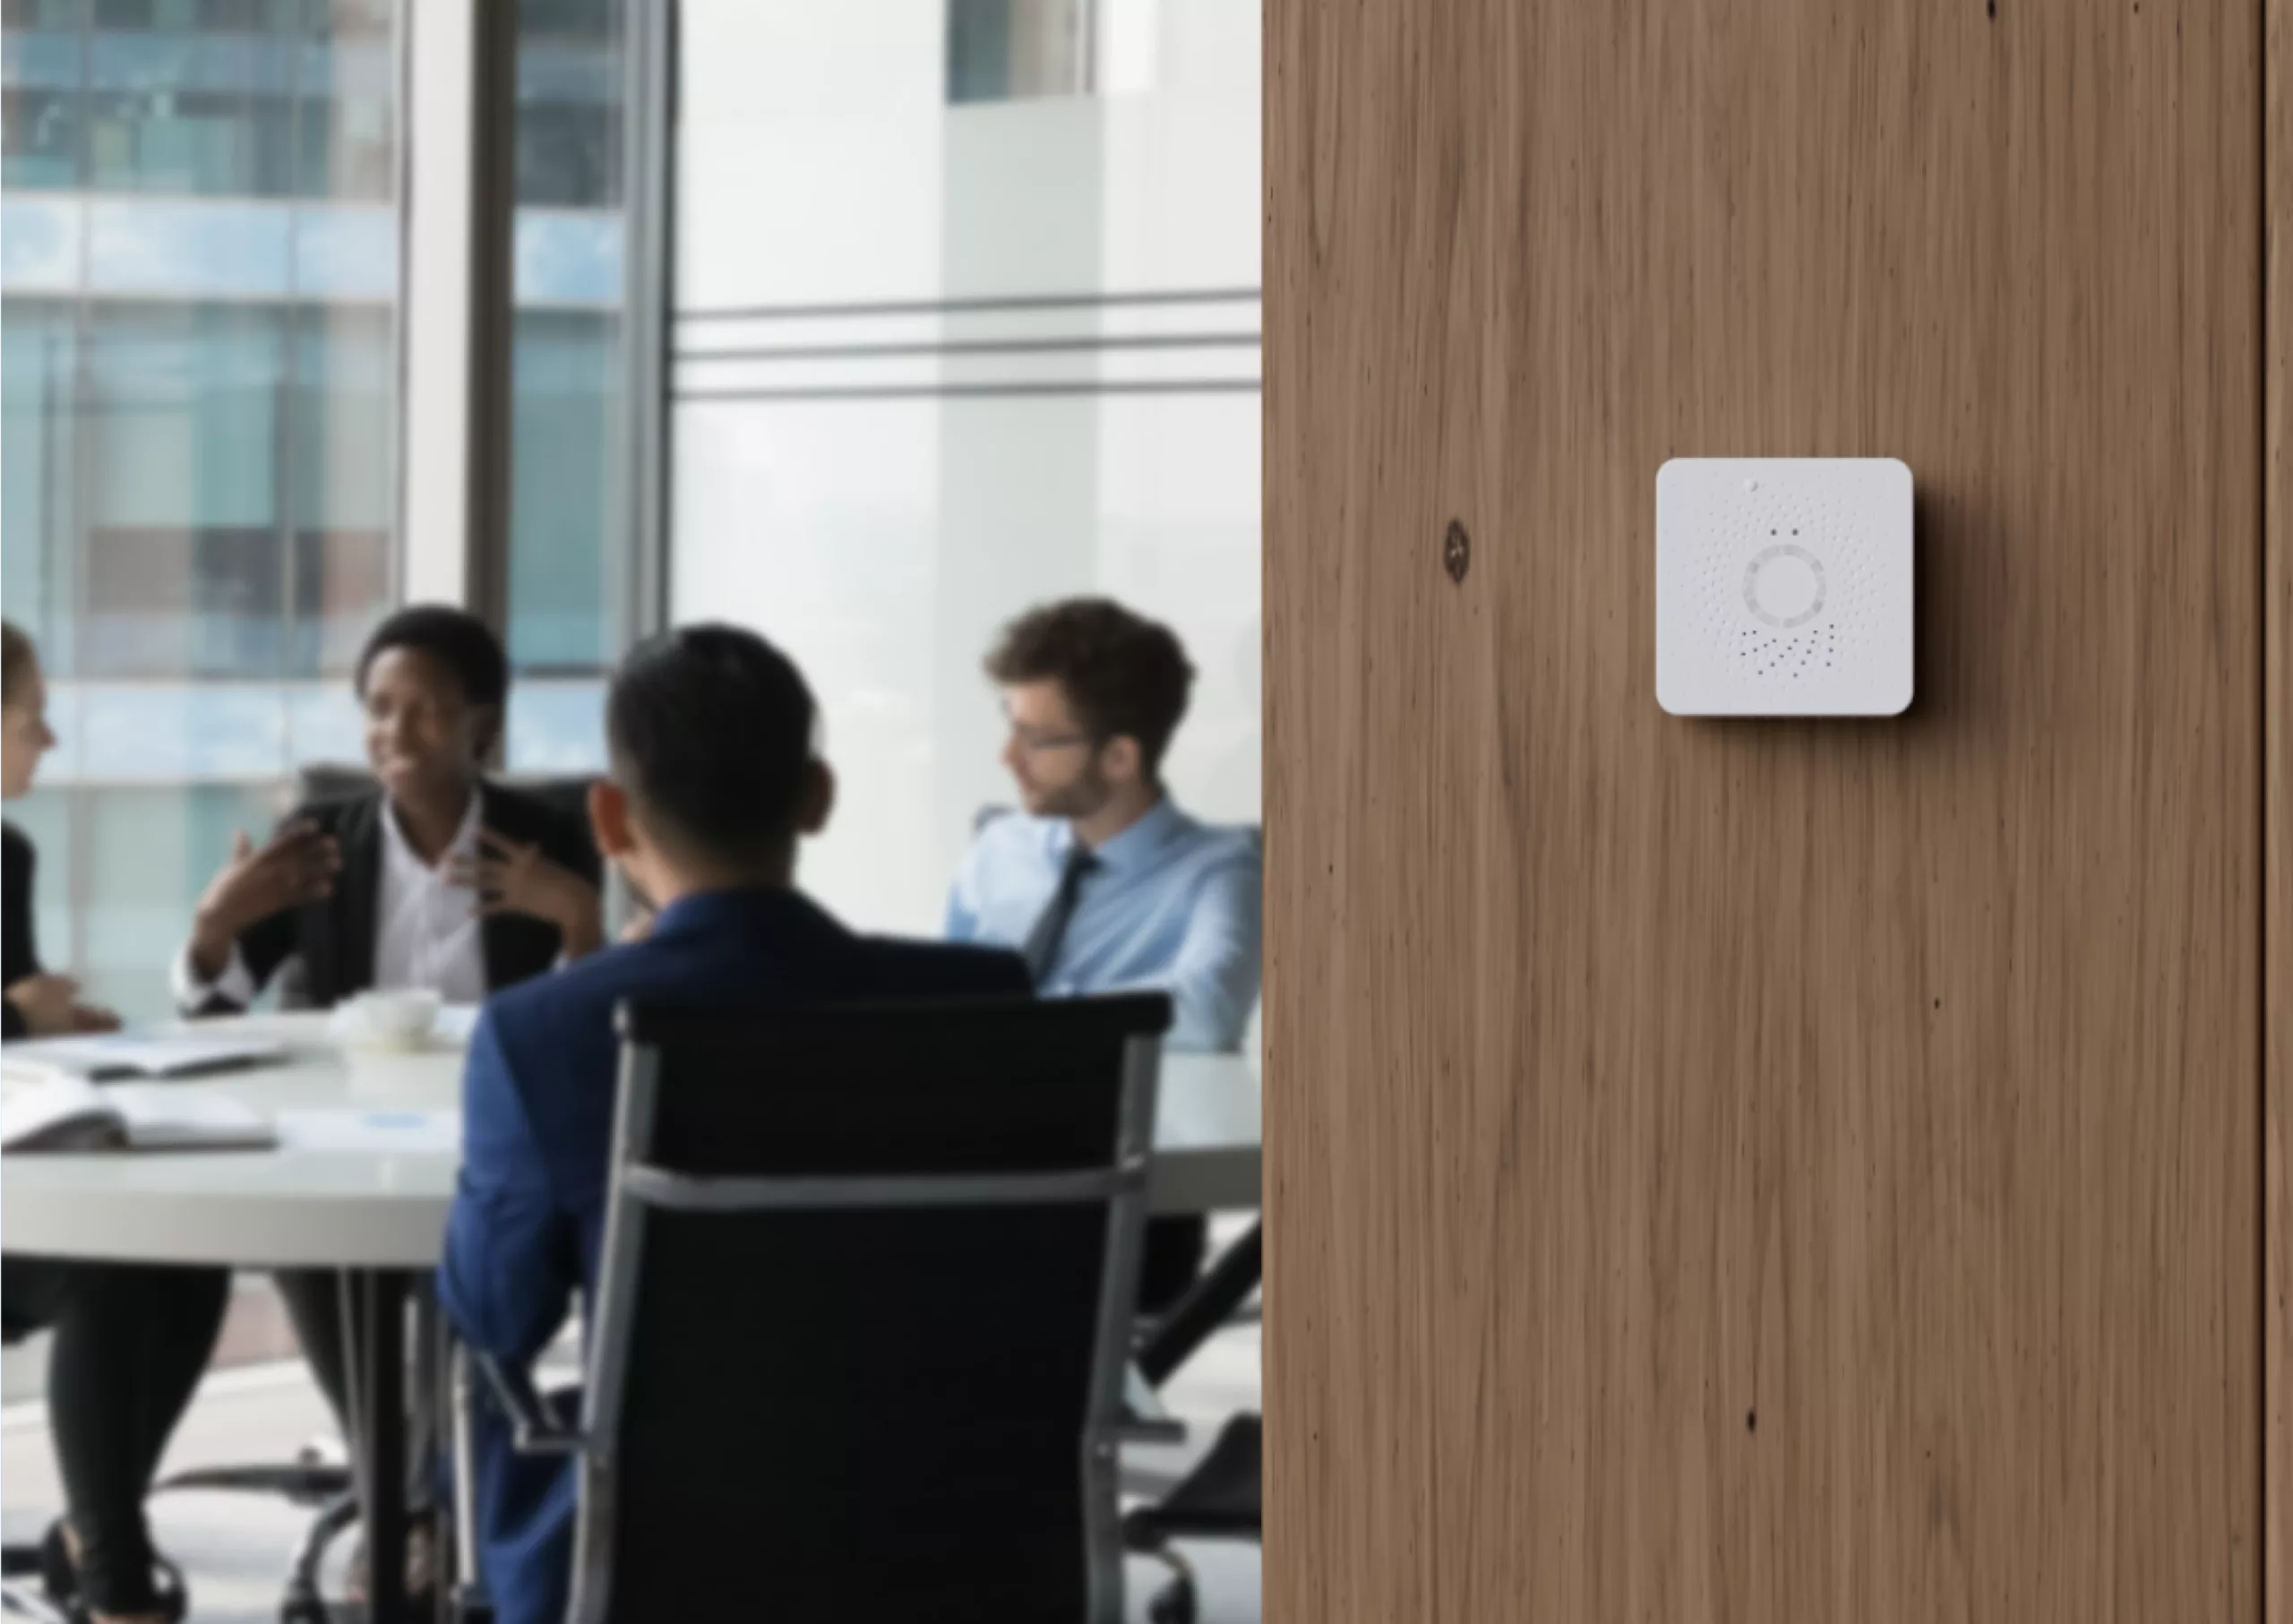 5 Best CO2 Monitors for Offices Chosen by Experts